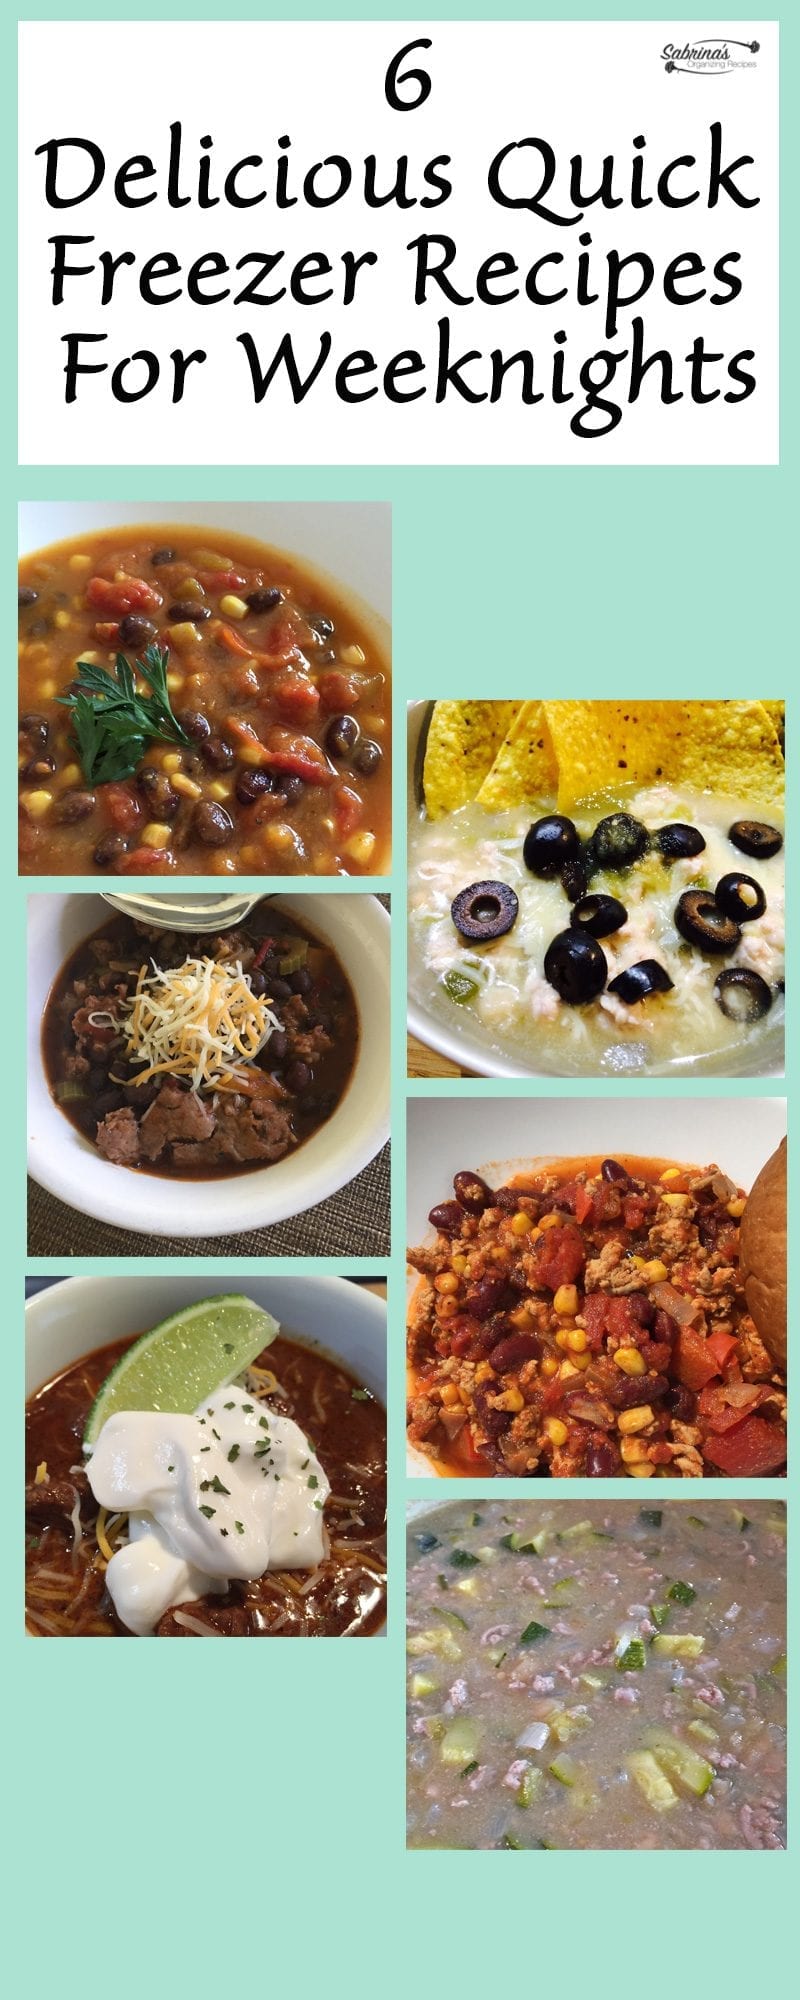 6 delicious quick freezer recipes for weeknights